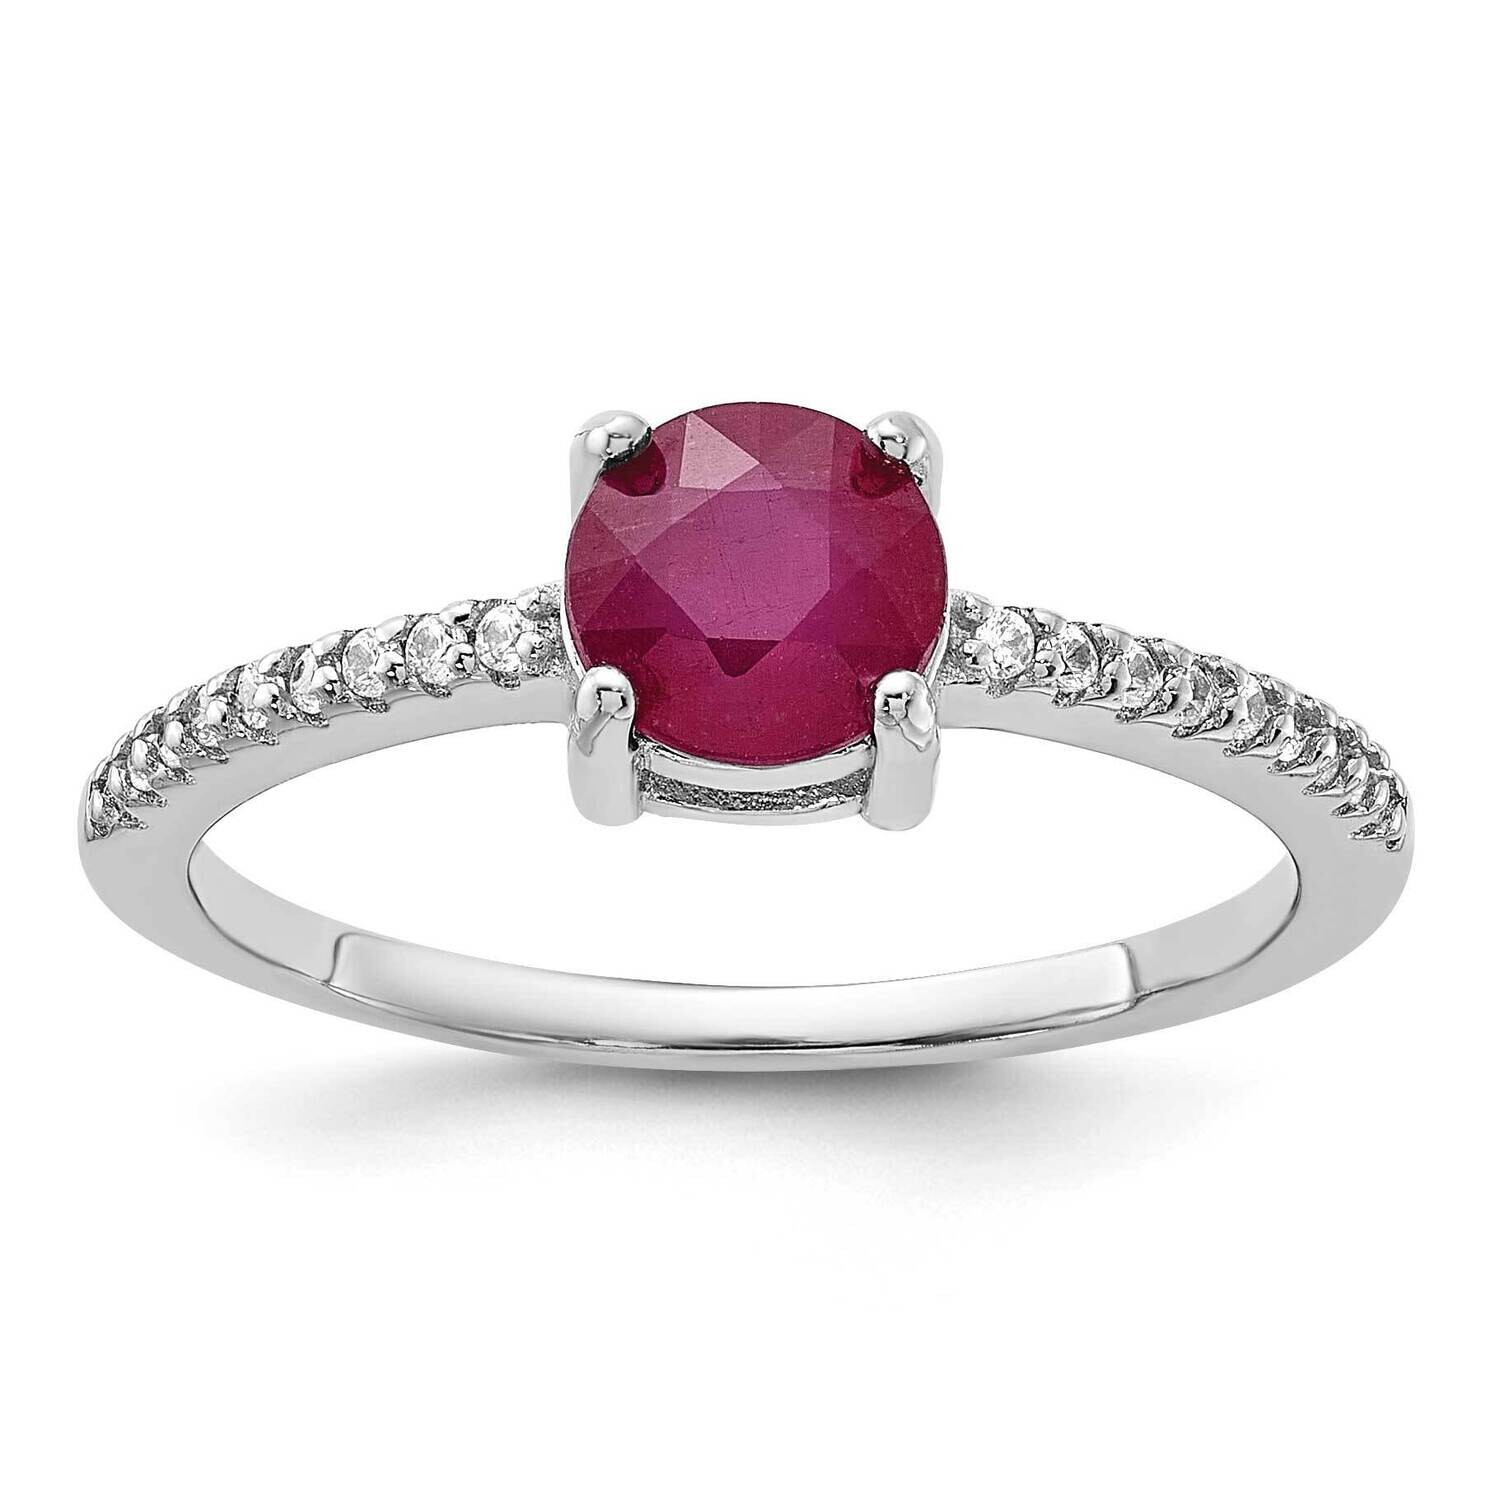 Rh-Plated-Plated 1.43R Ruby .12Wt White Topaz Ring Sterling Silver QR7443R